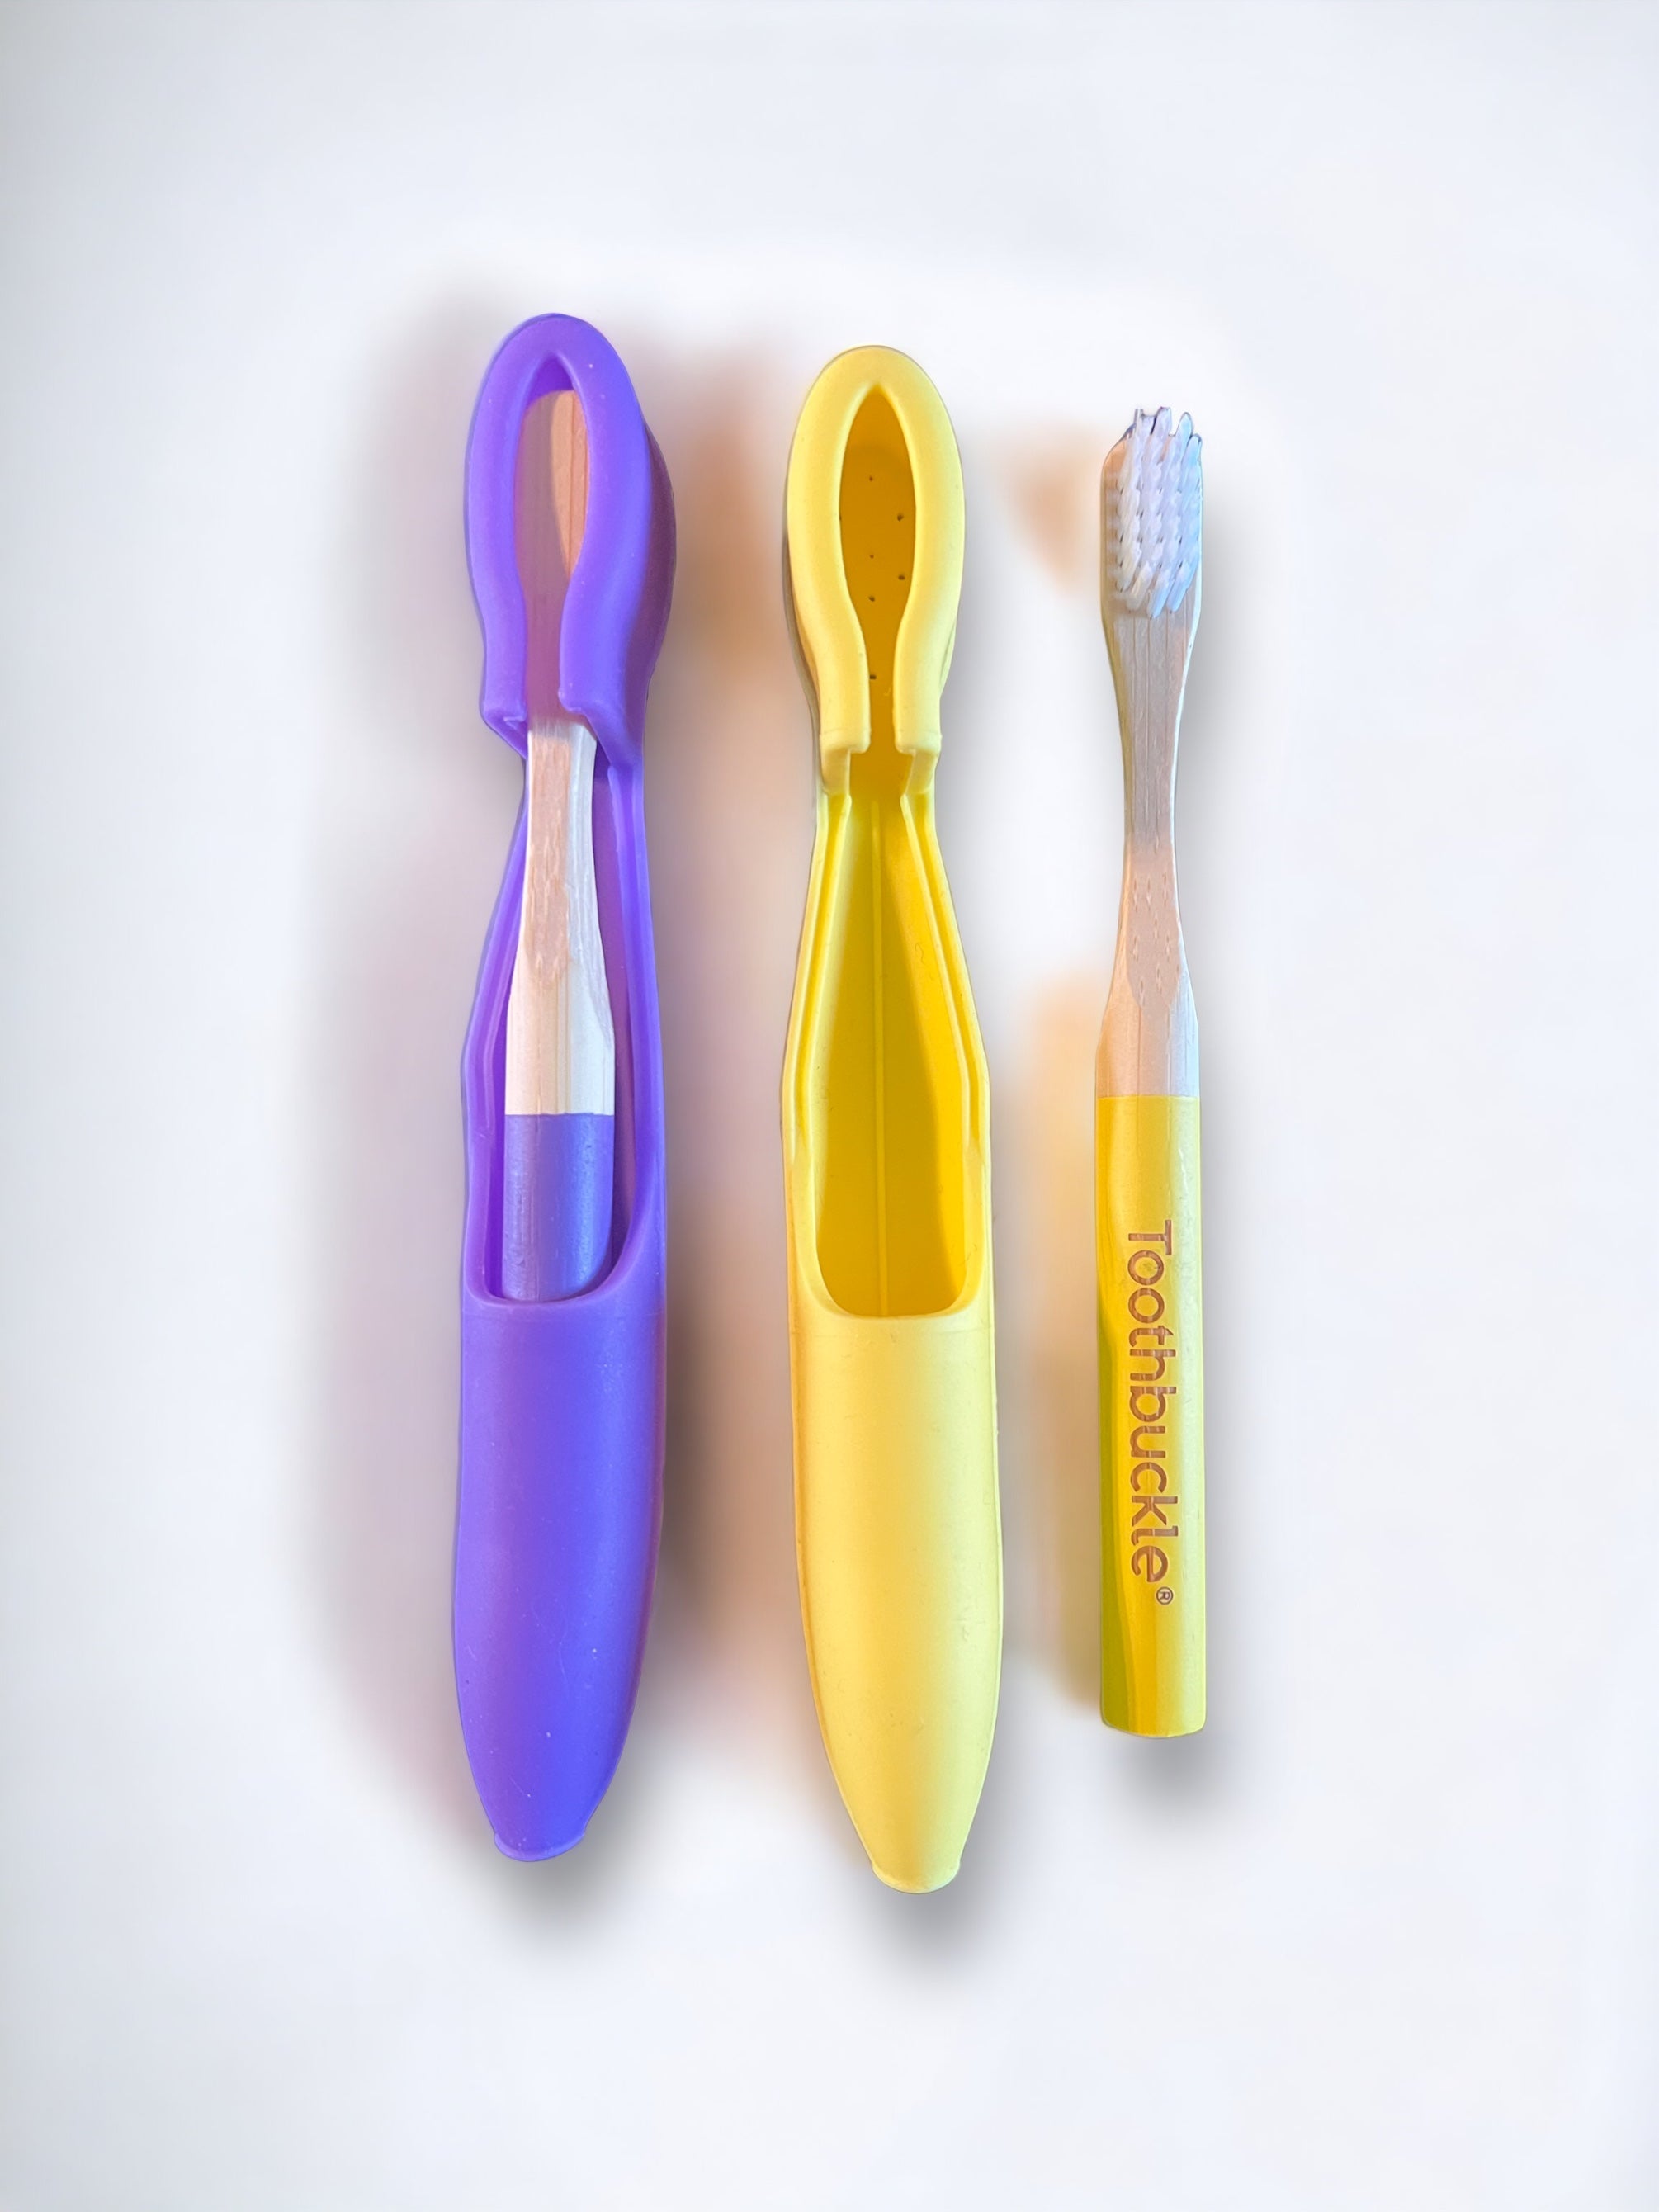 Kids Purple The Magical Dreamcatcher & Yellow Sunlight Sparkle Toothbrush Oral Care Bundle